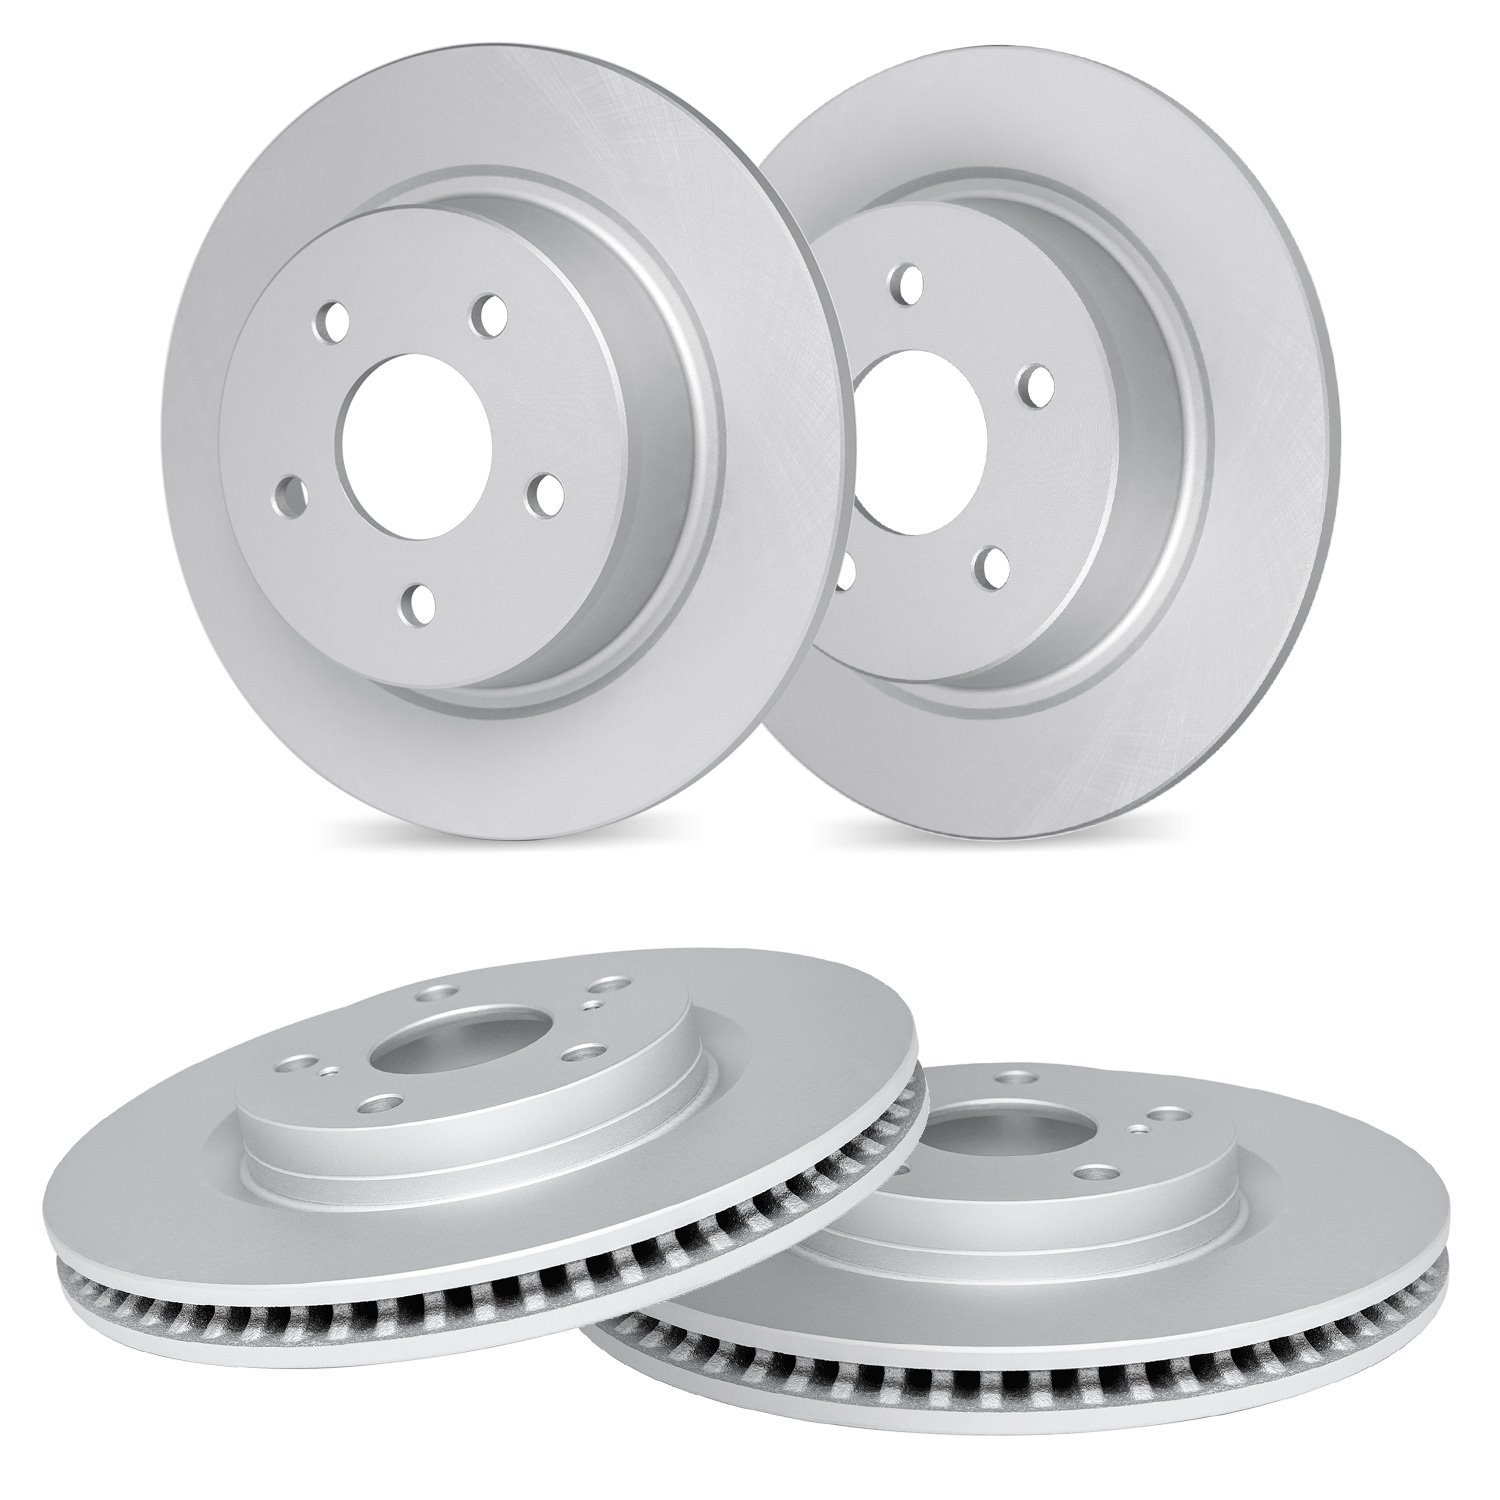 GEO-Carbon Brake Rotor Set, Fits Select Acura/Honda, Position: Front & Rear